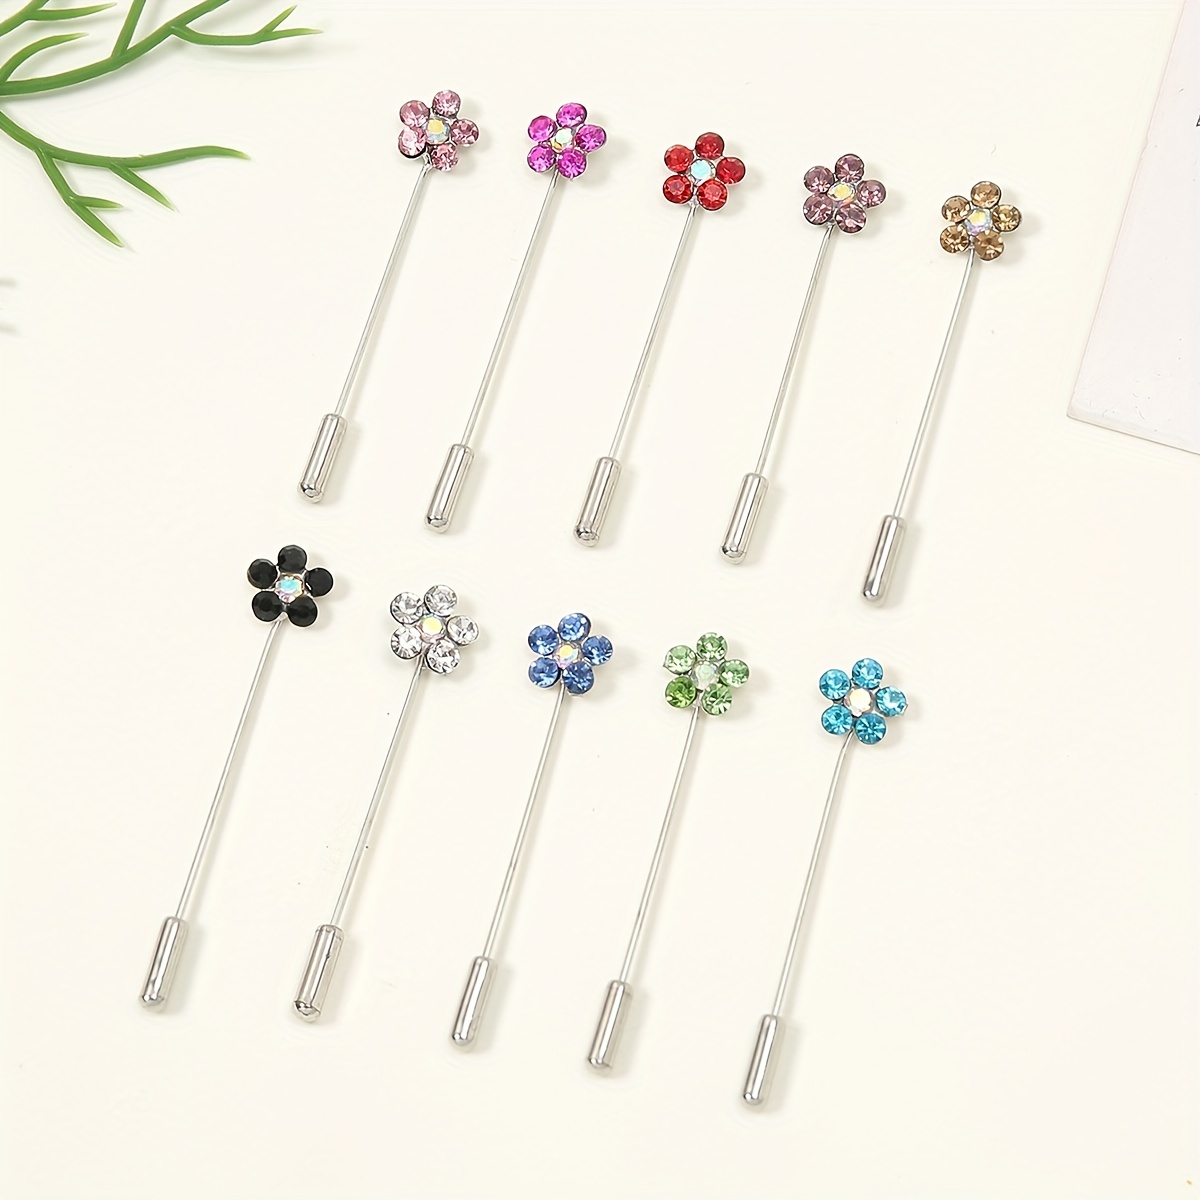 30pcs Set Crystal Rhinestone Flower Hijab Pins For Women Scarves Muslim  Jewelry Accessories Brooches Clips Mixed Color Wholesale